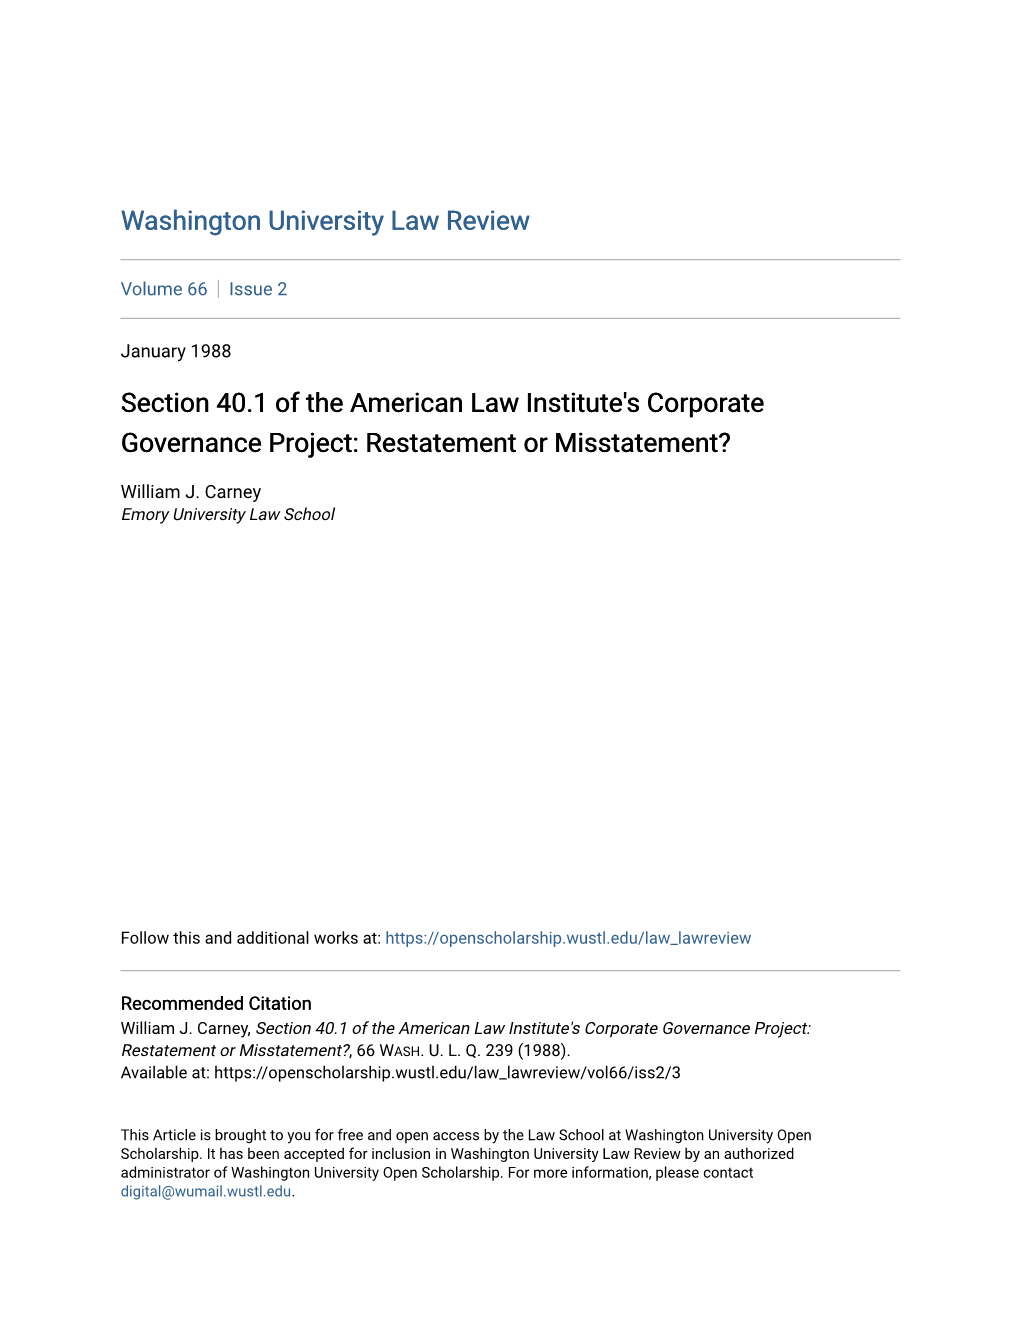 Section 40.1 of the American Law Institute's Corporate Governance Project: Restatement Or Misstatement?